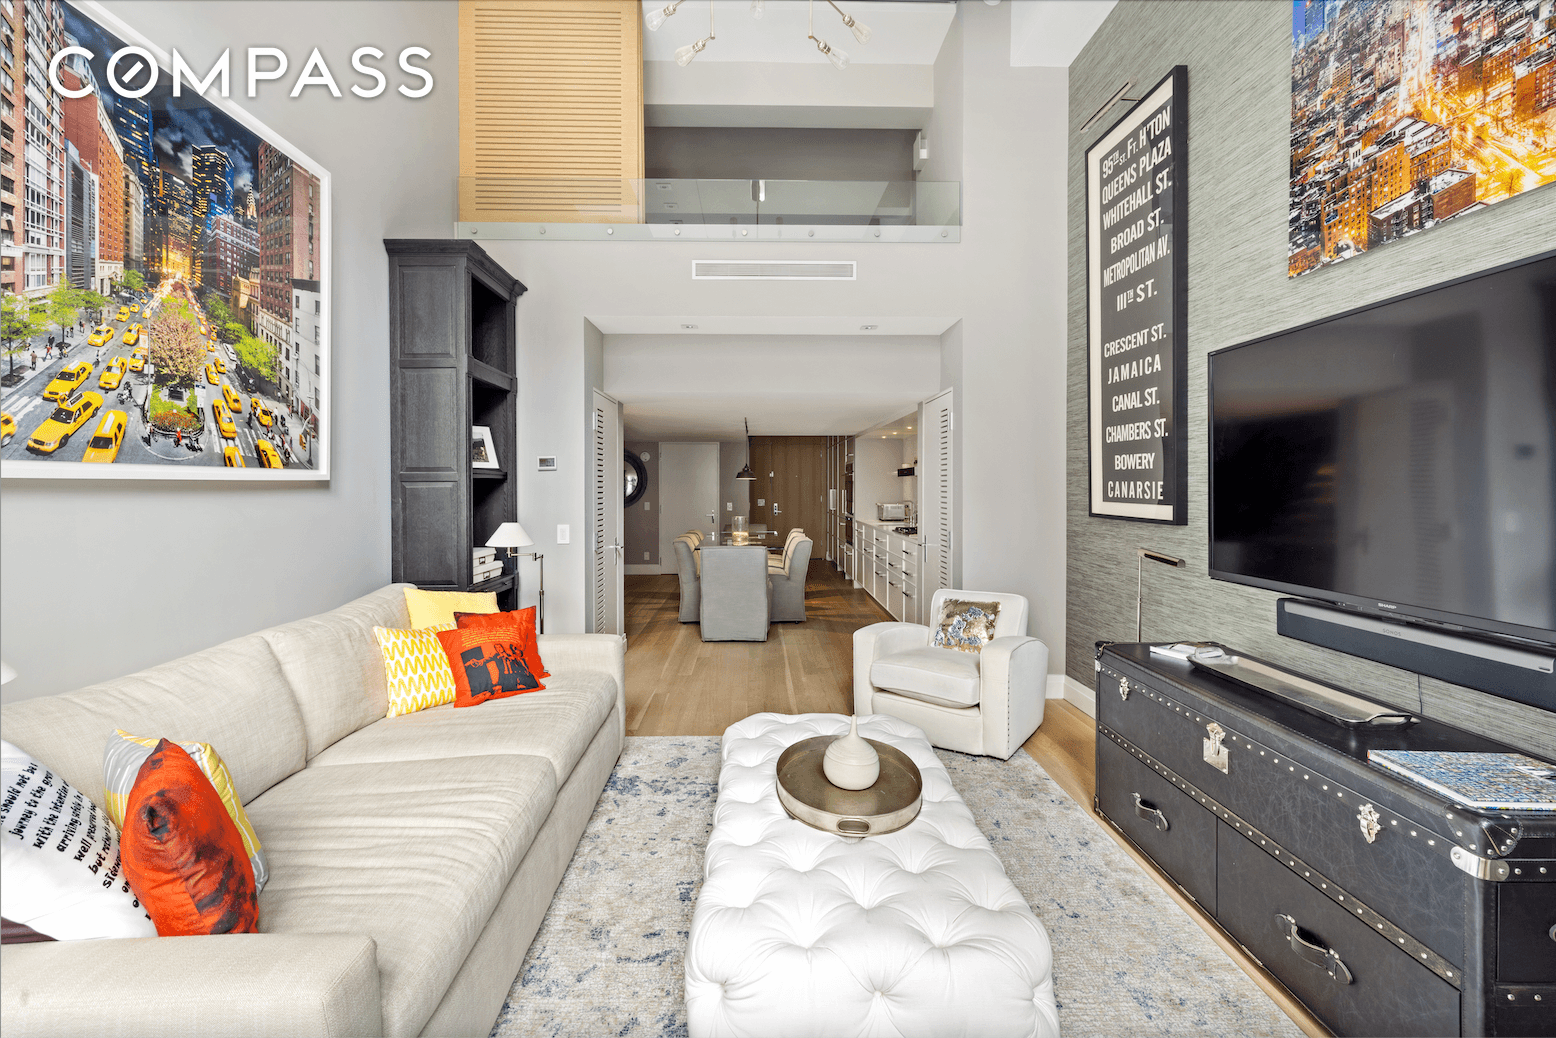 Two bedroom plus office, two and a half bathroom duplex loft featuring breathtaking proportions and exceptional storage in one of the West Village's best full service condominiums.